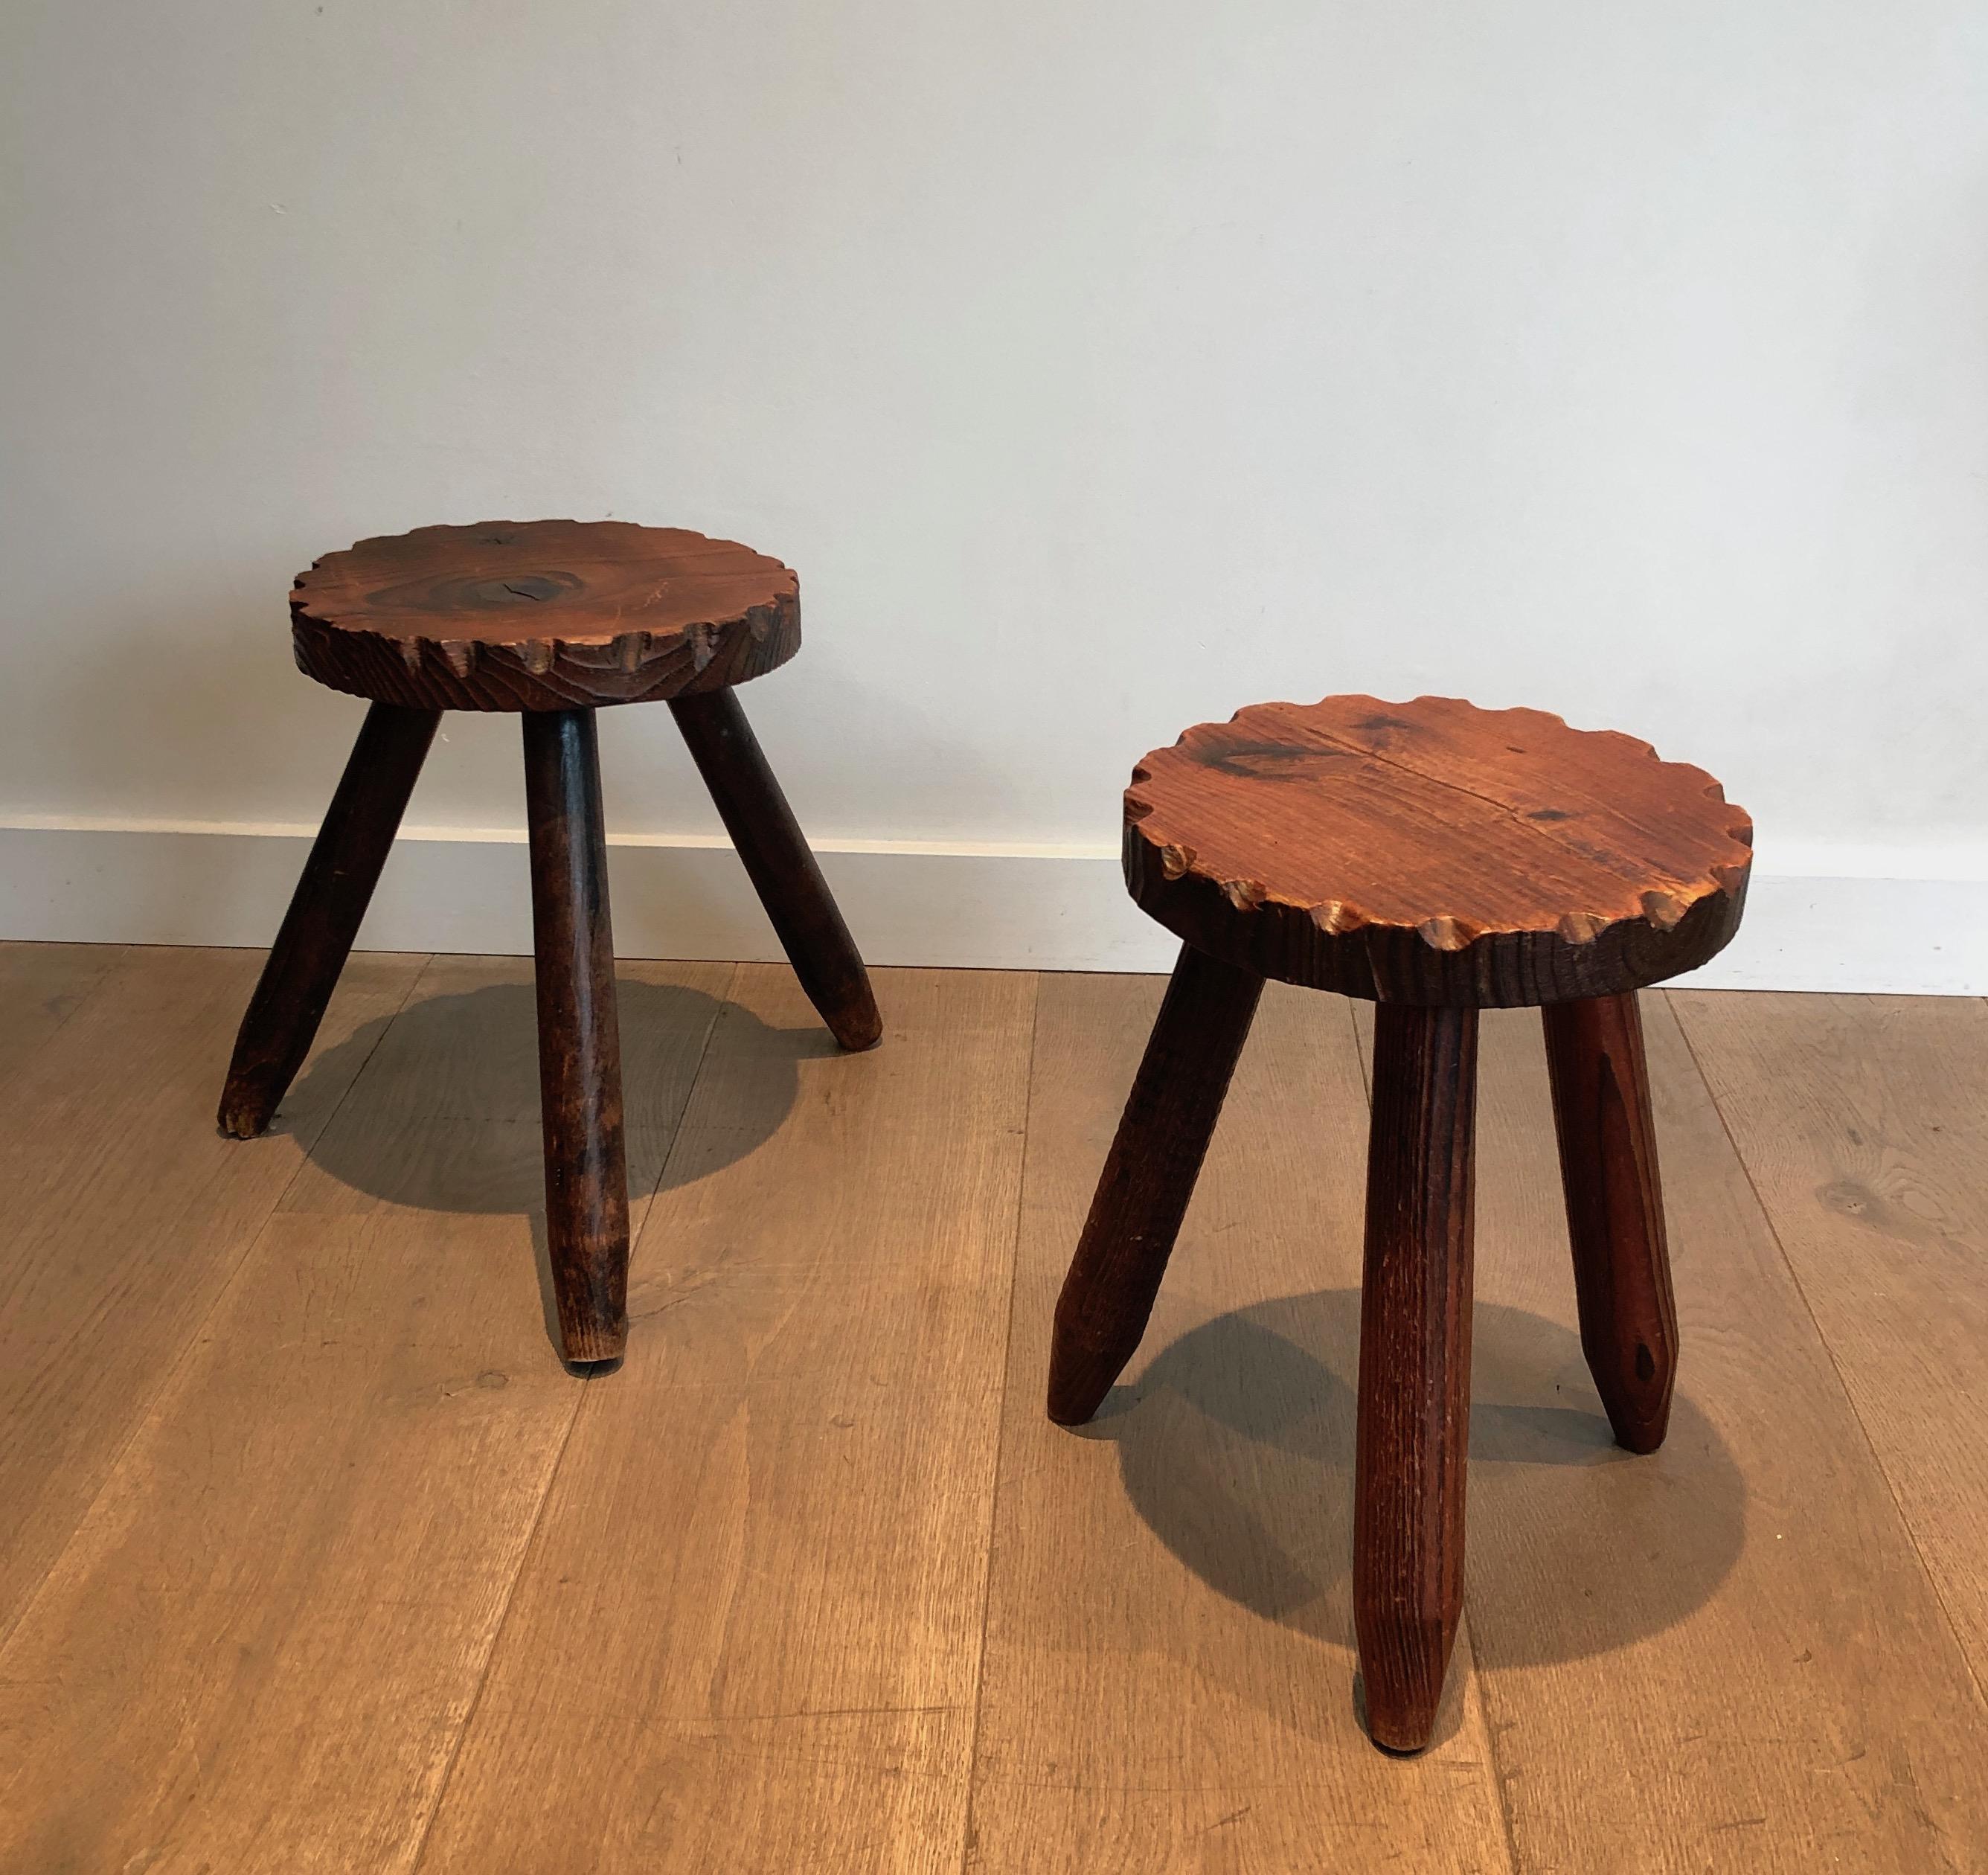 Pair of Pine Brutalist Stools, French Work, circa 1950 For Sale 15